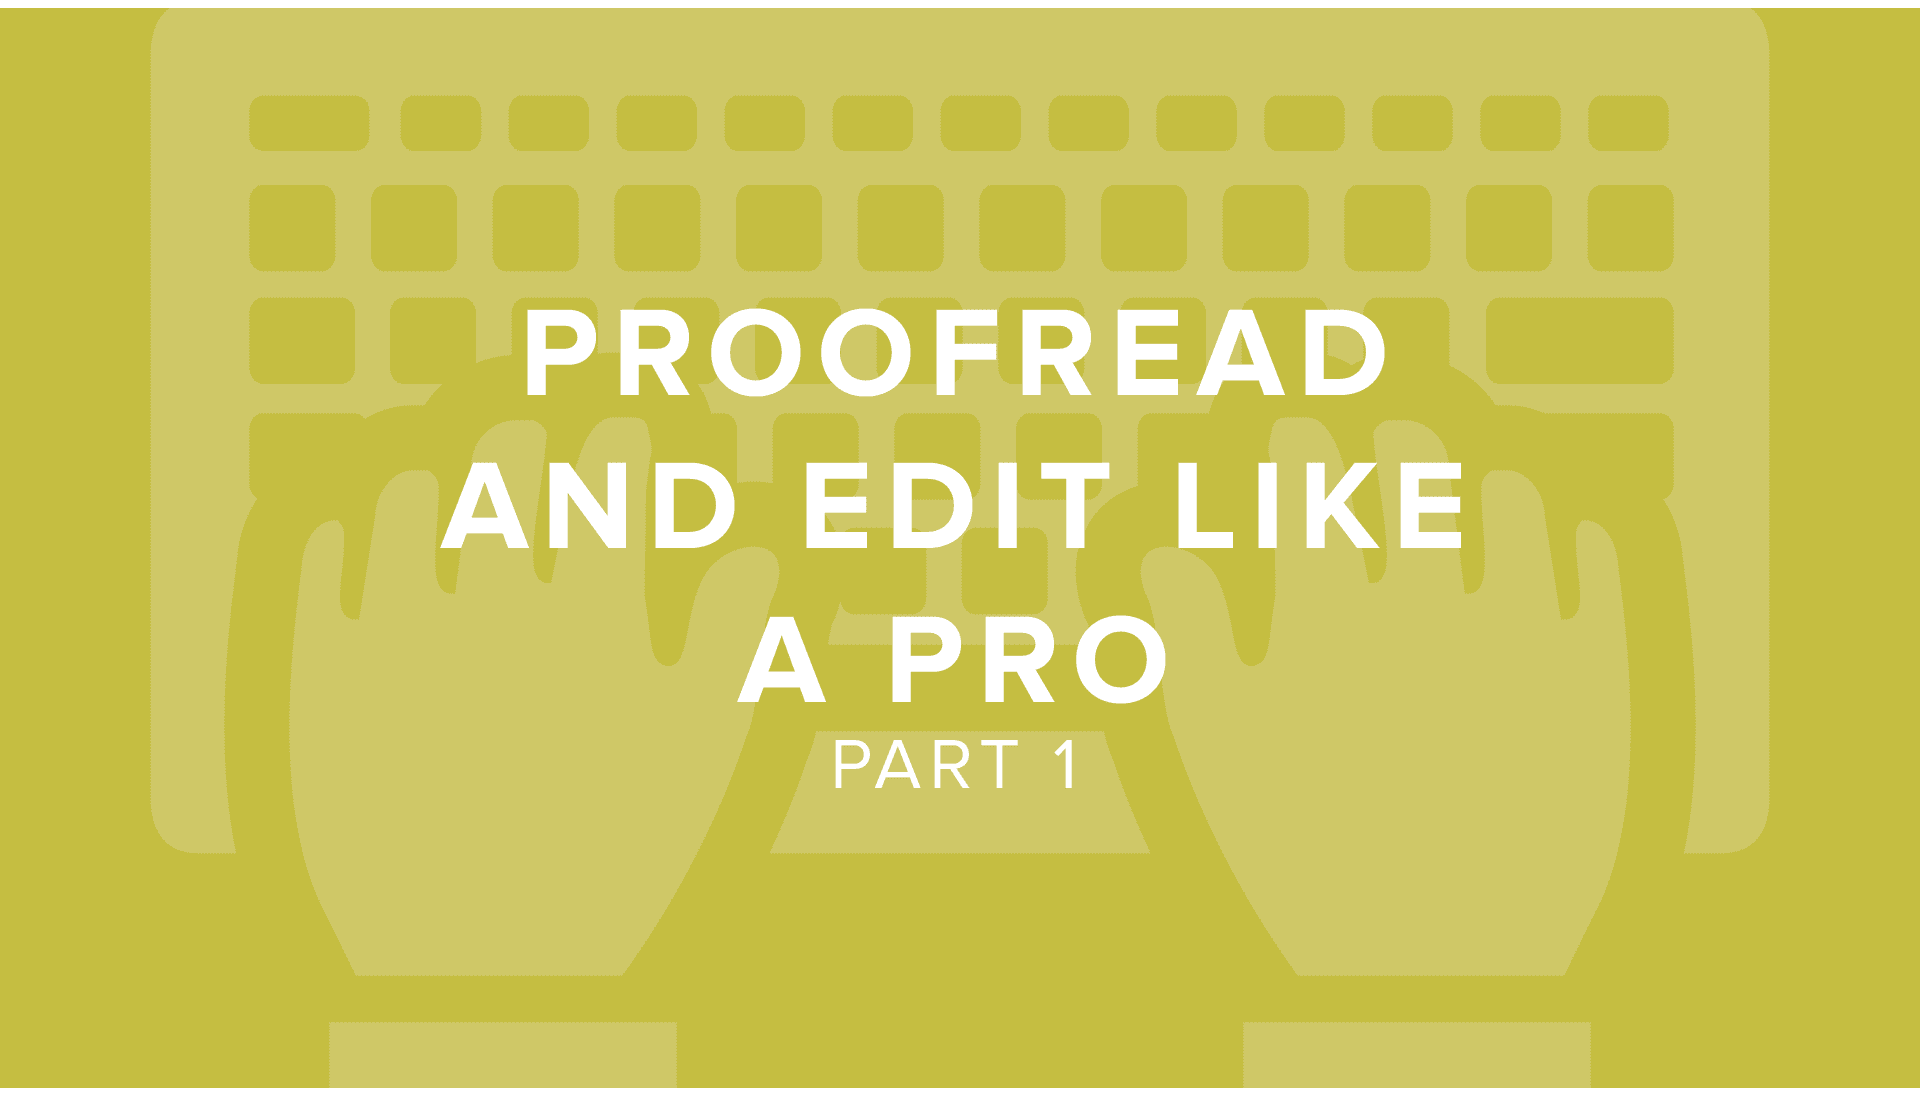 DigitalChalk: Part 1: Proofread and Edit Like a Pro